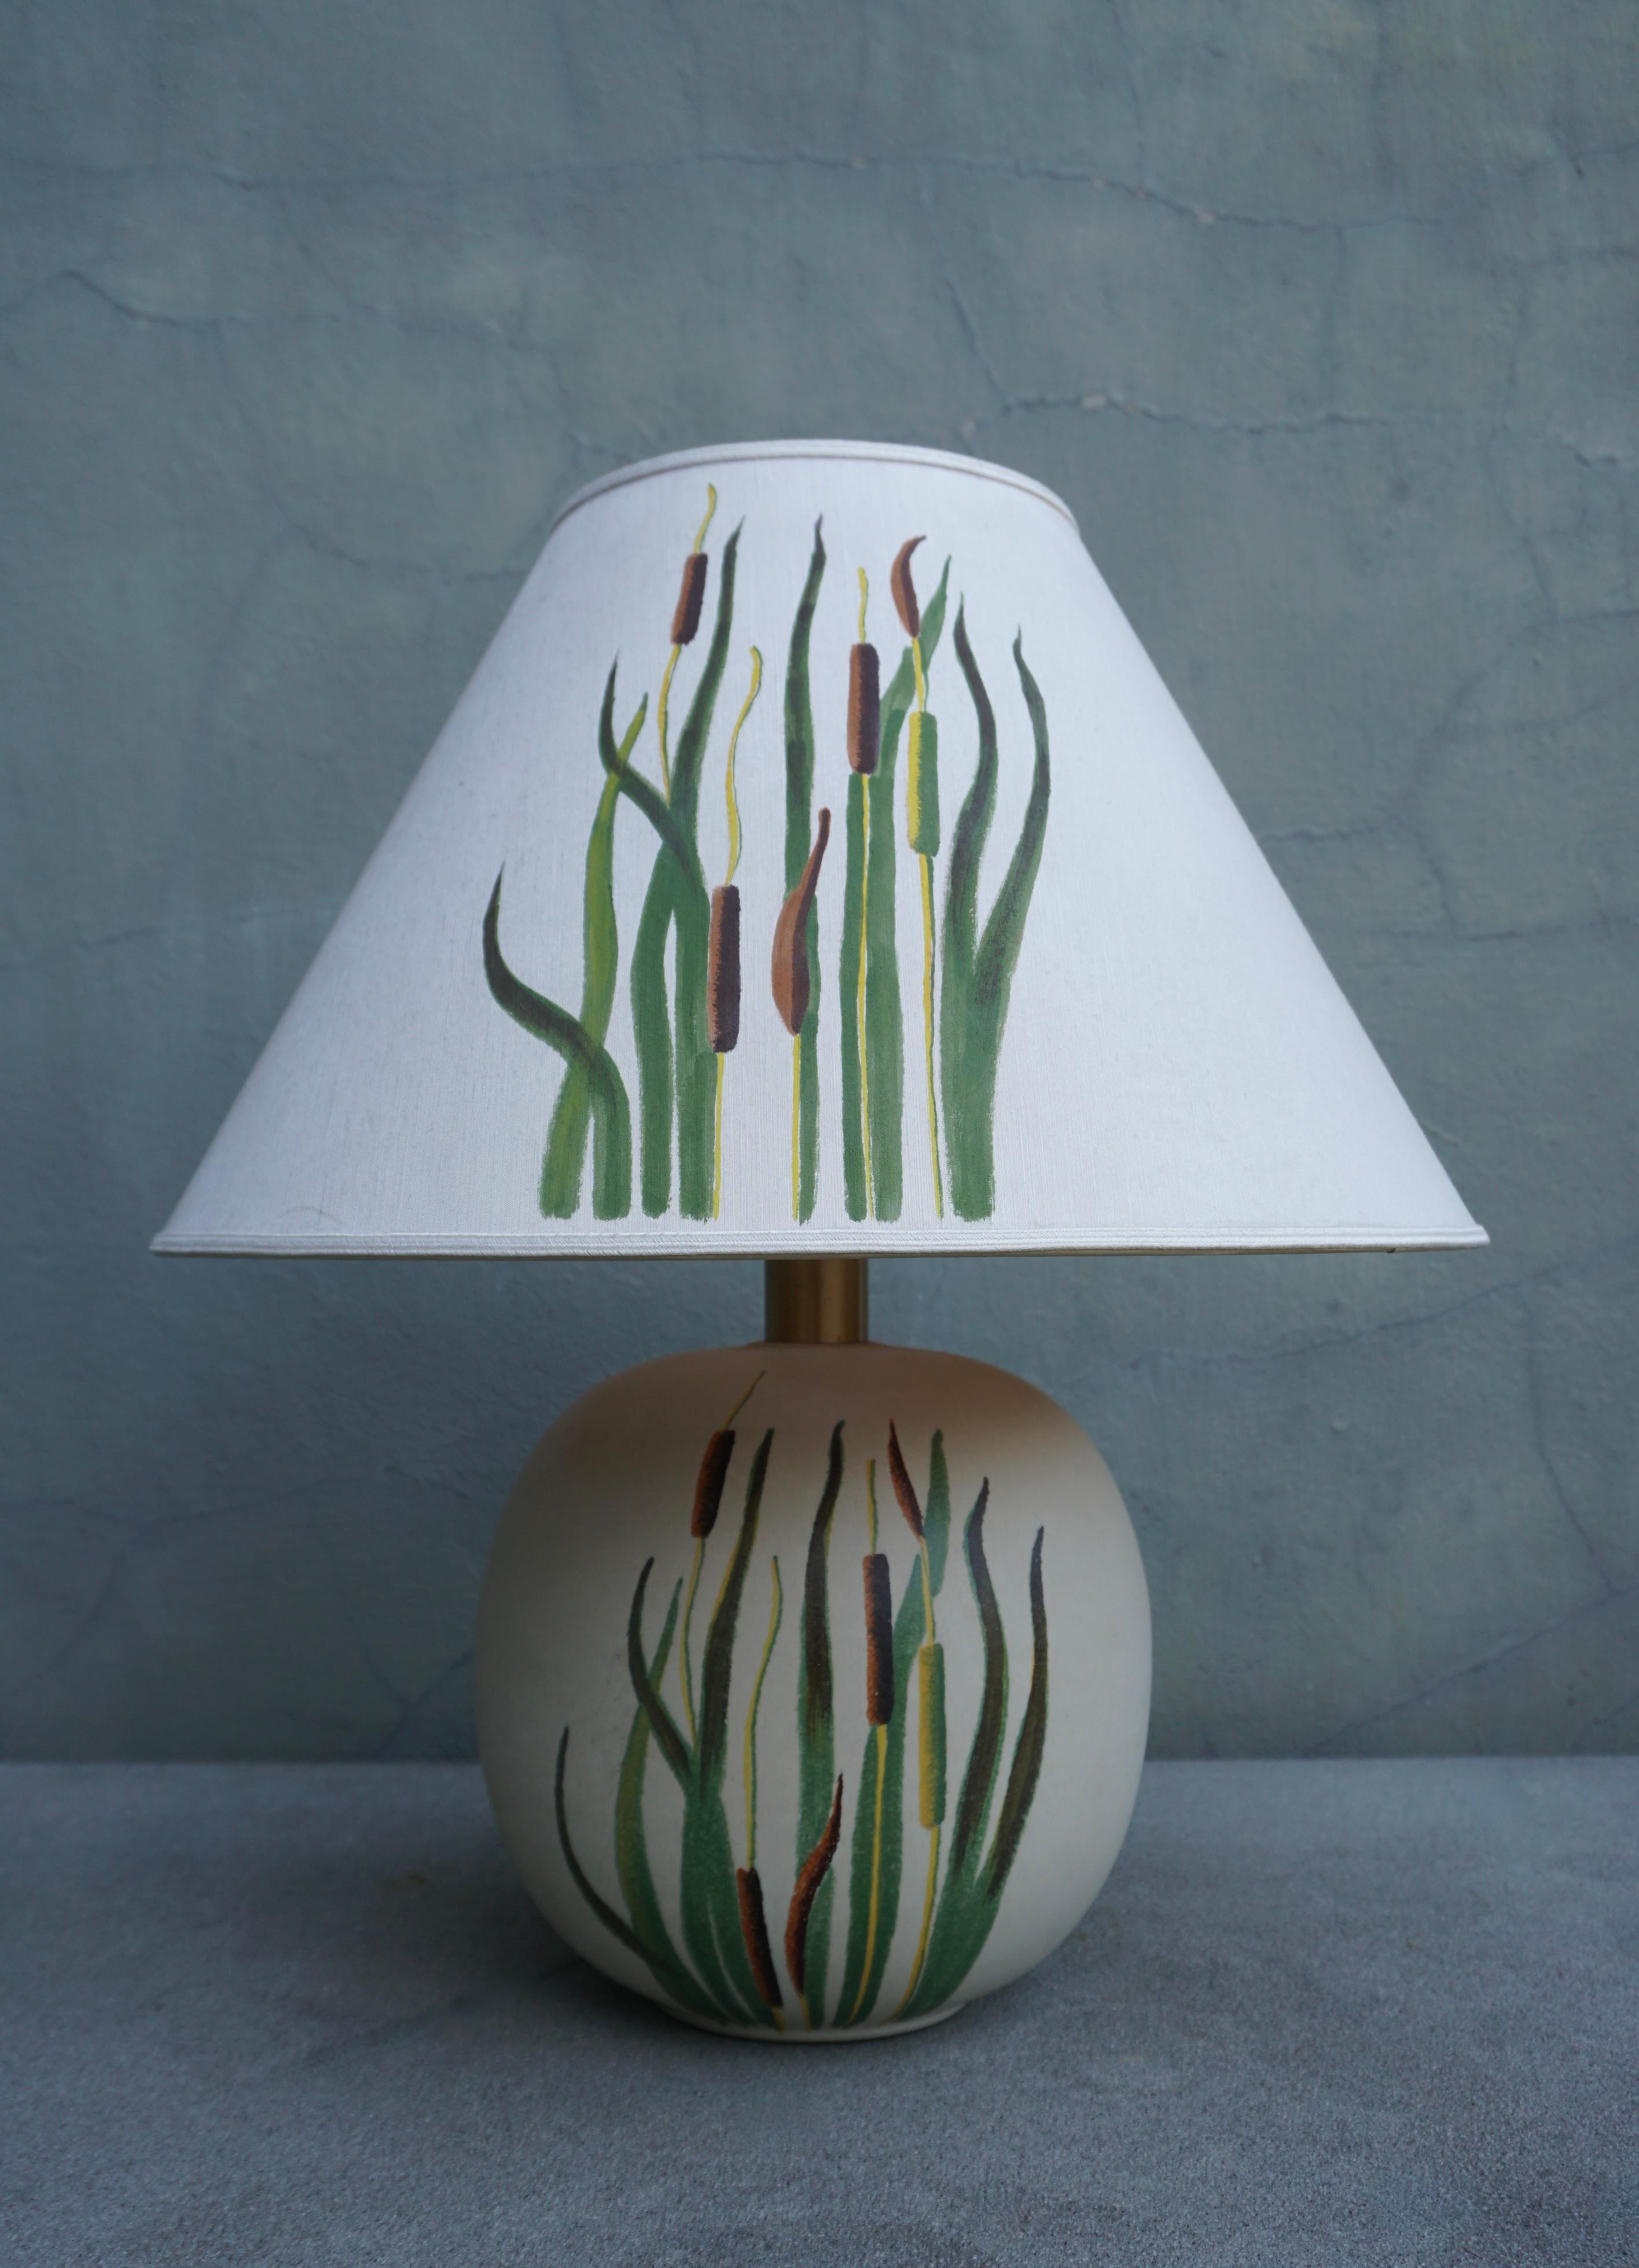 Beautiful ceramic table lamp with botanical representation of cattails grass.

Height 24.8